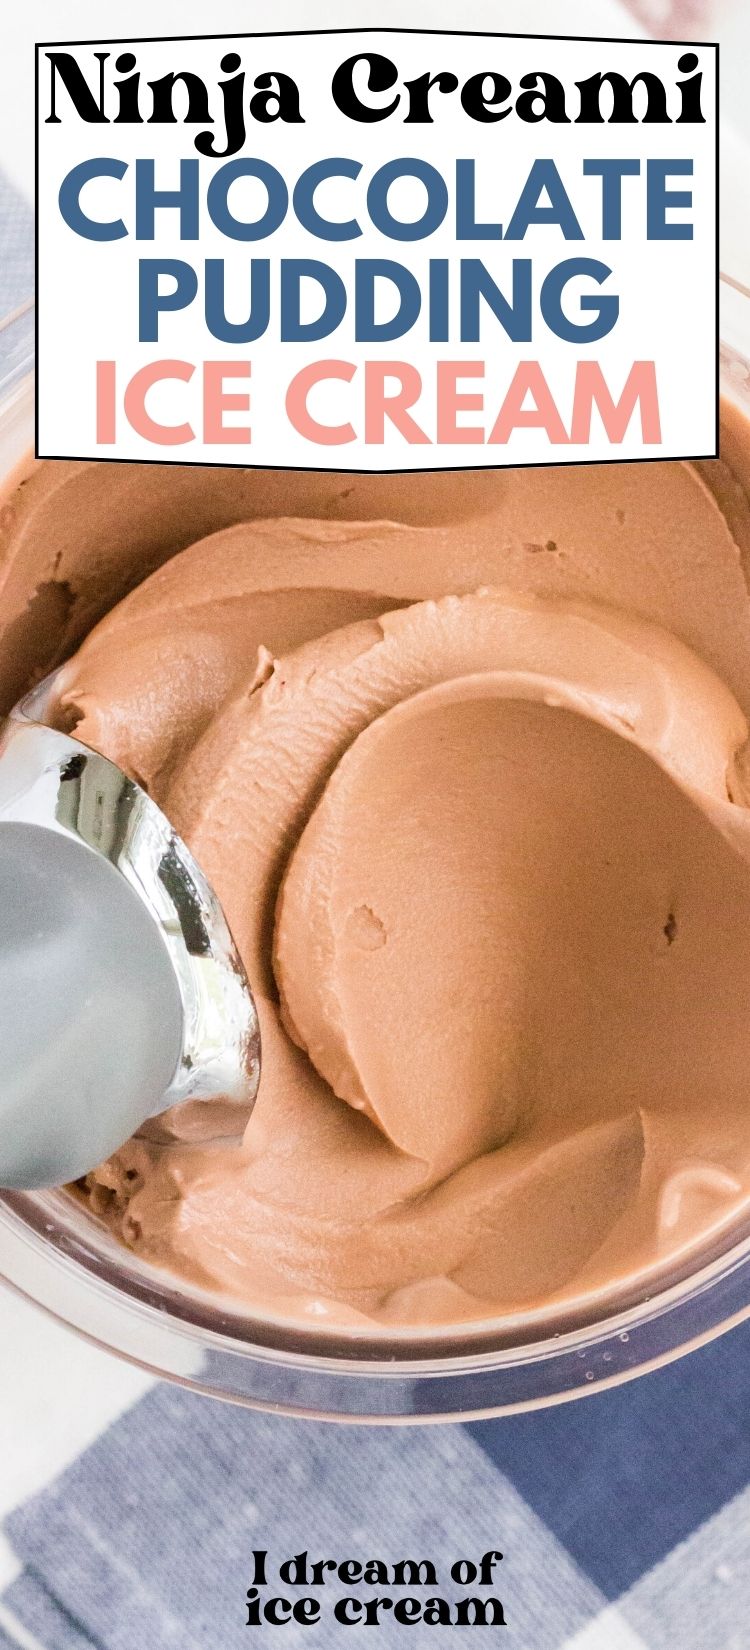 close-up view of an ice cream scoop swirling chocolate pudding ice cream in a Ninja Creami pint container.